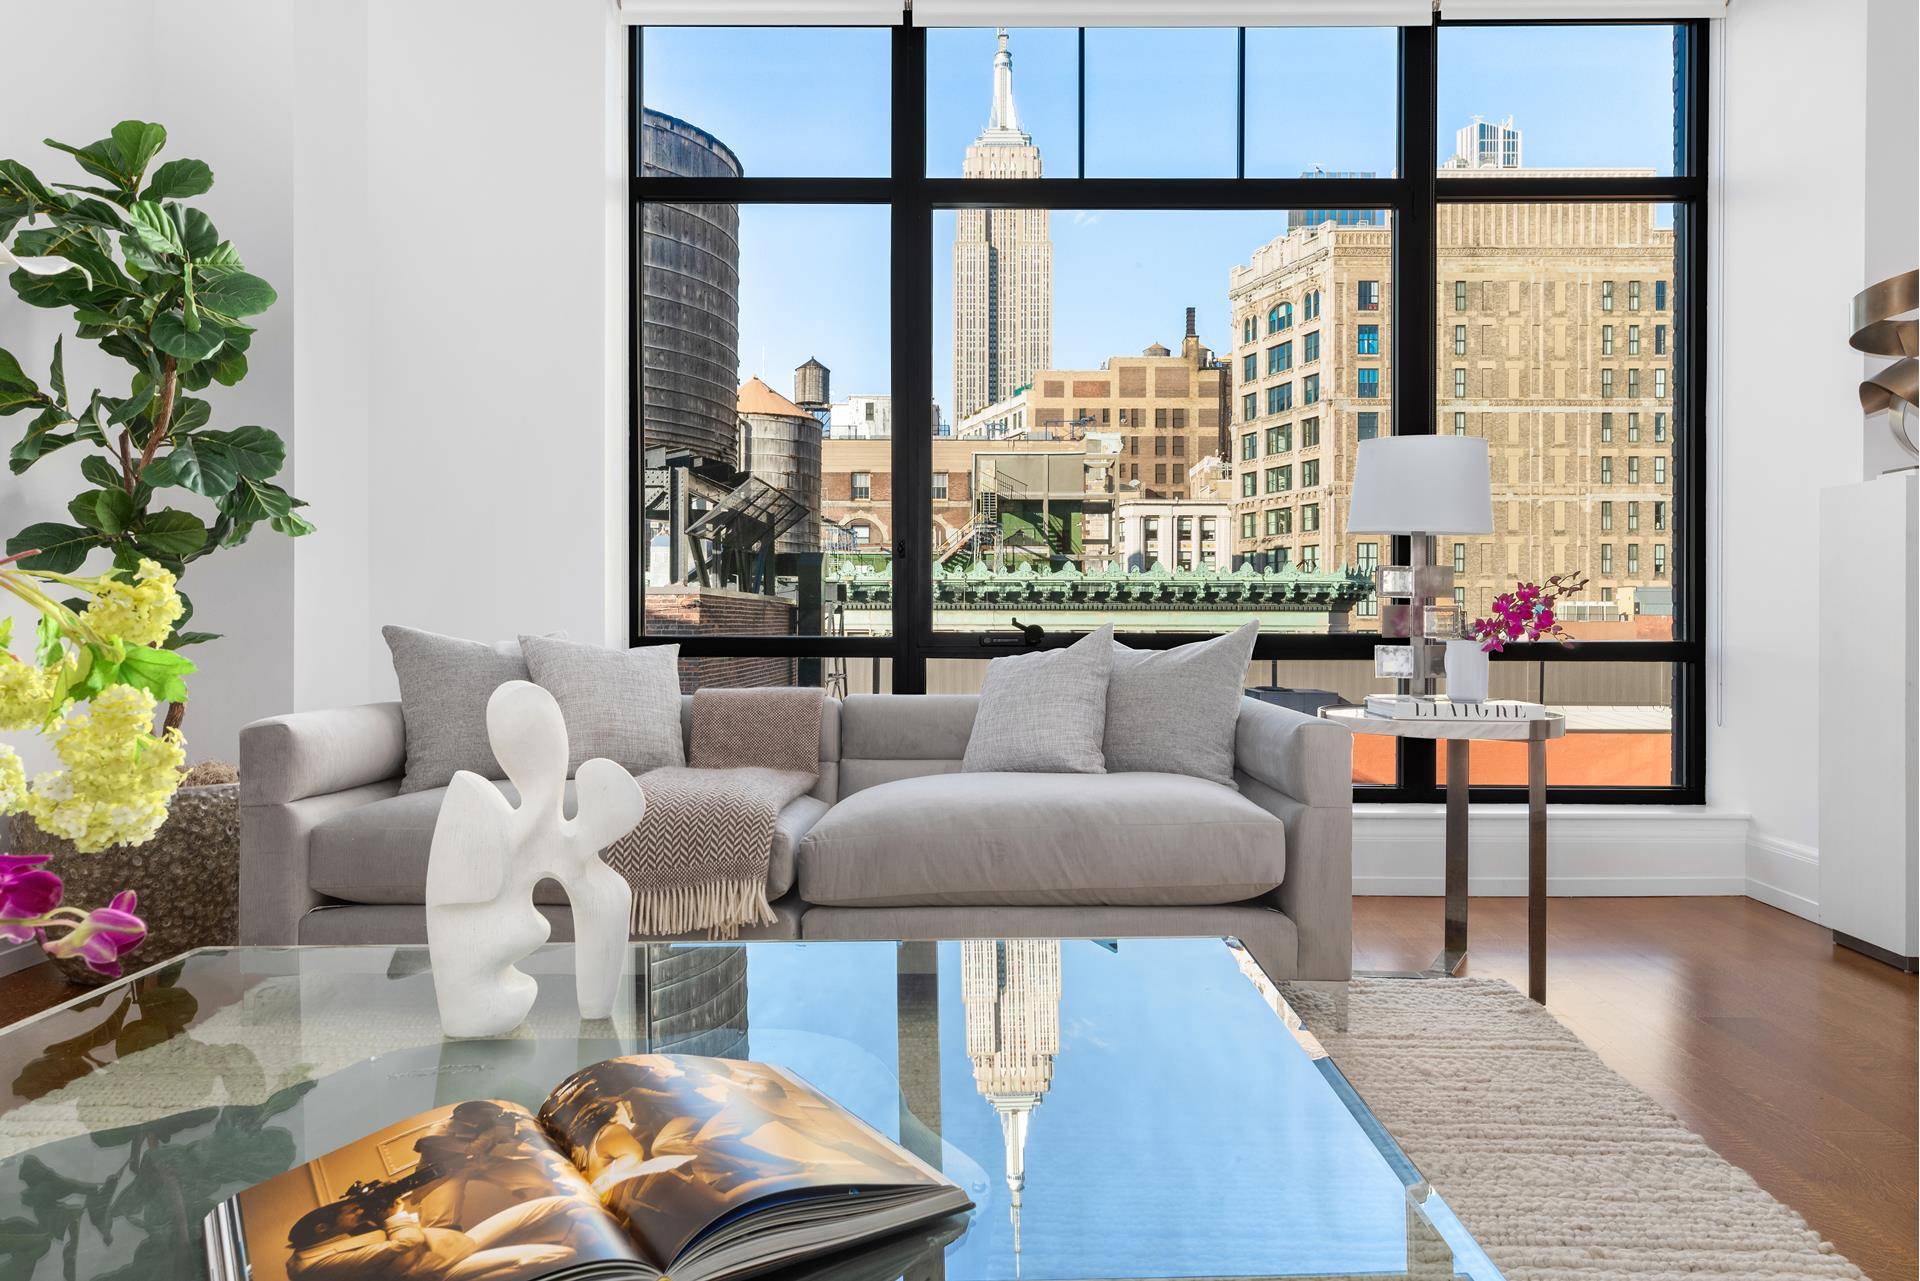 Welcome home to 10 Madison Square West, one of Flatiron's most prestigious highly coveted condominiums.